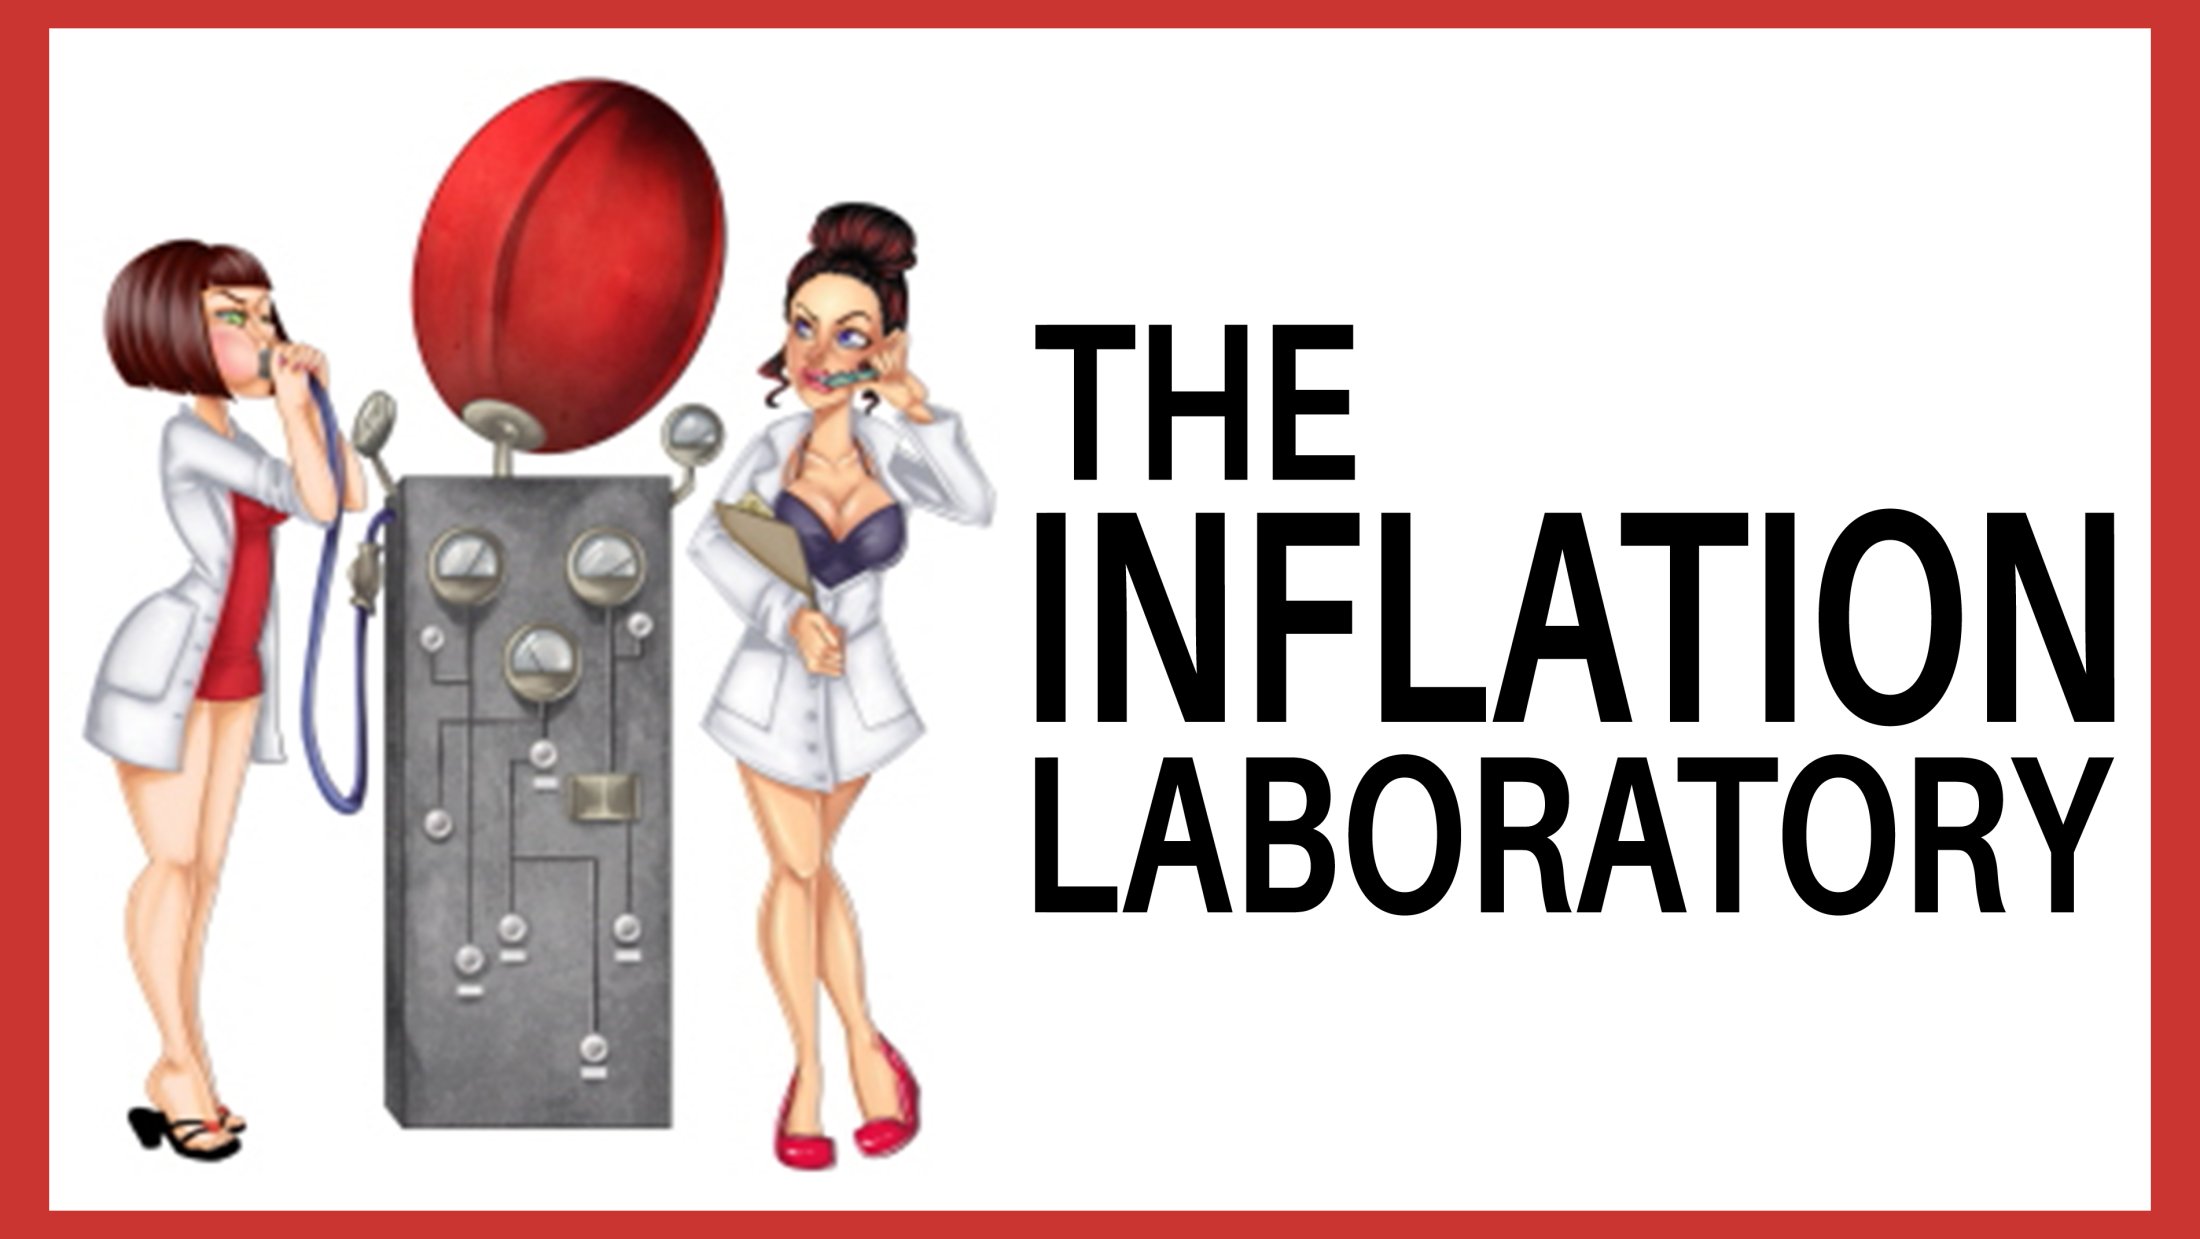 The Inflation Laboratory